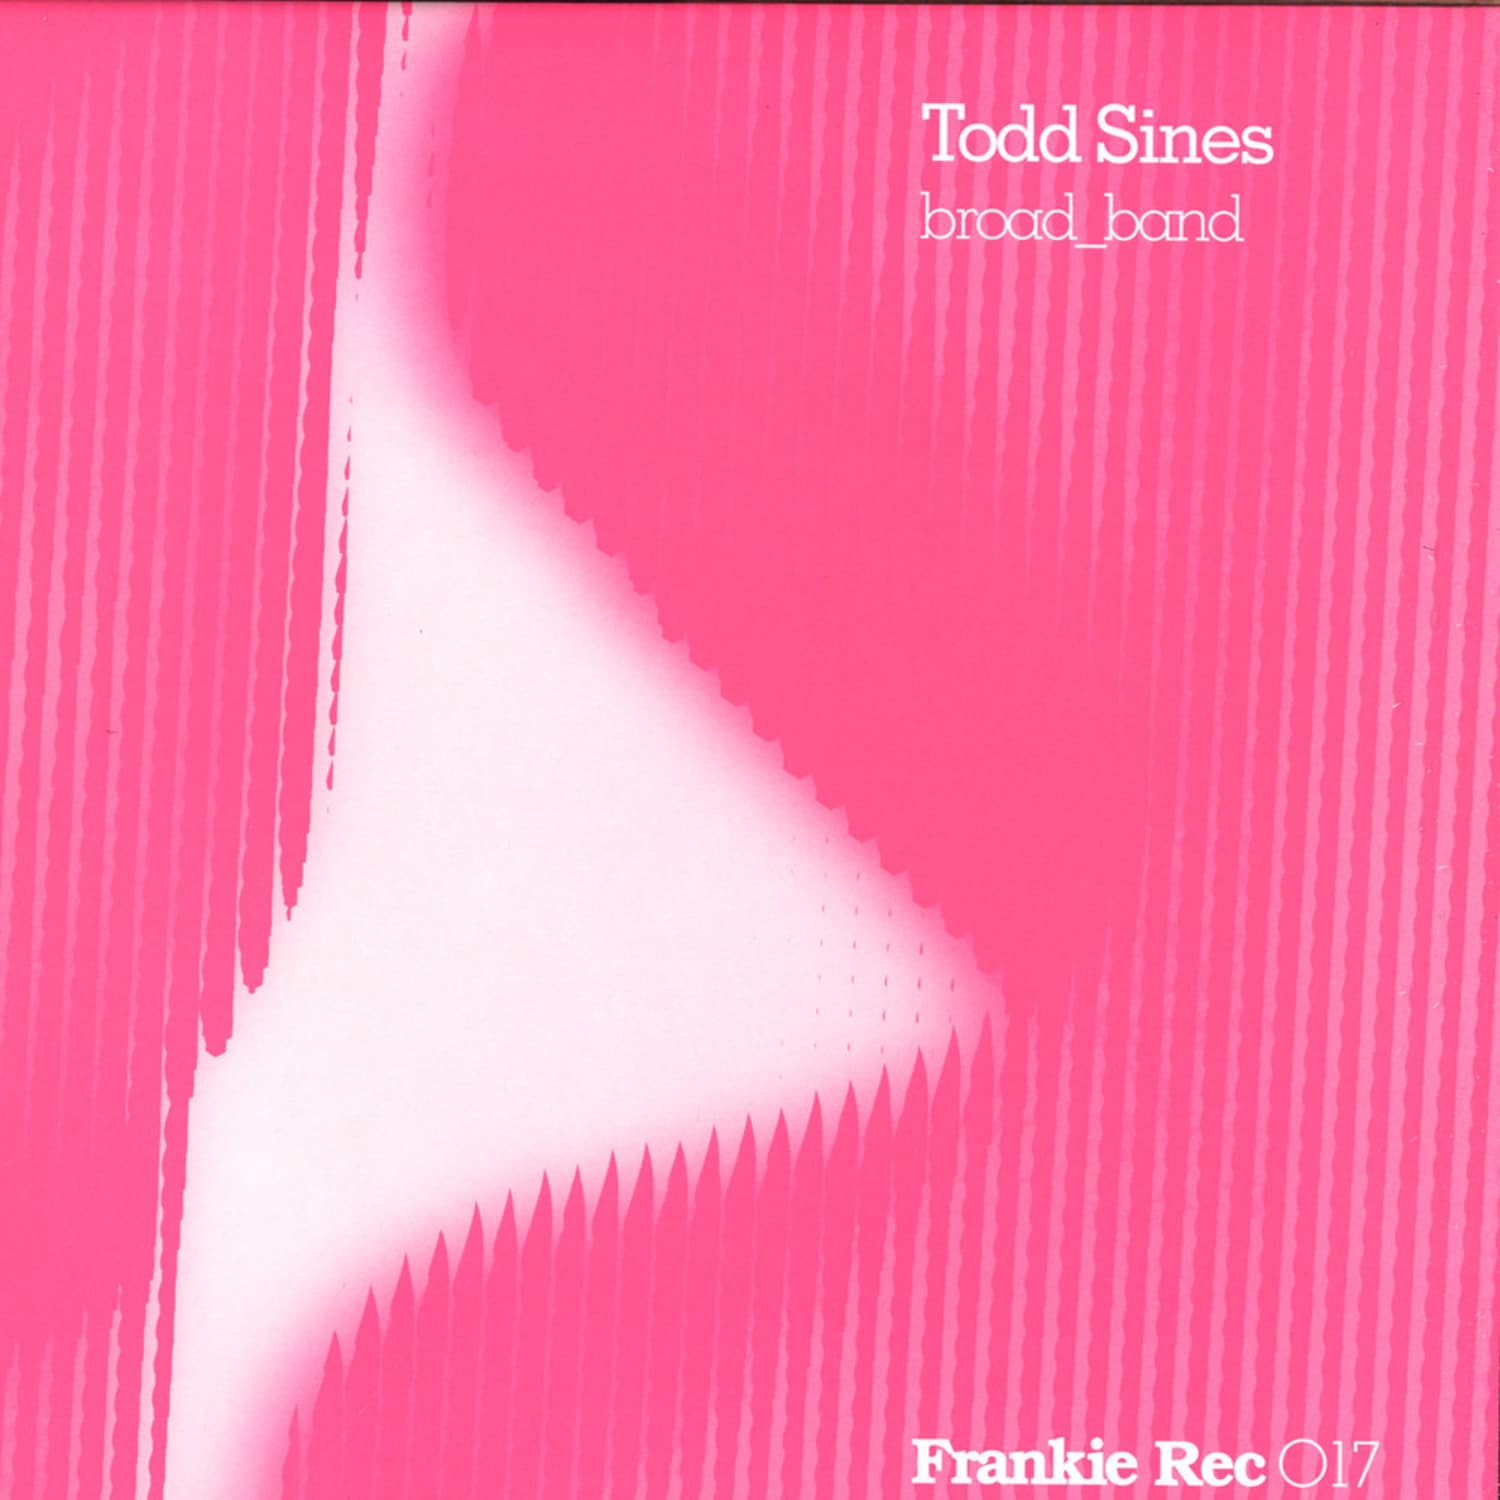 Todd Sines - BROAD BAND EP